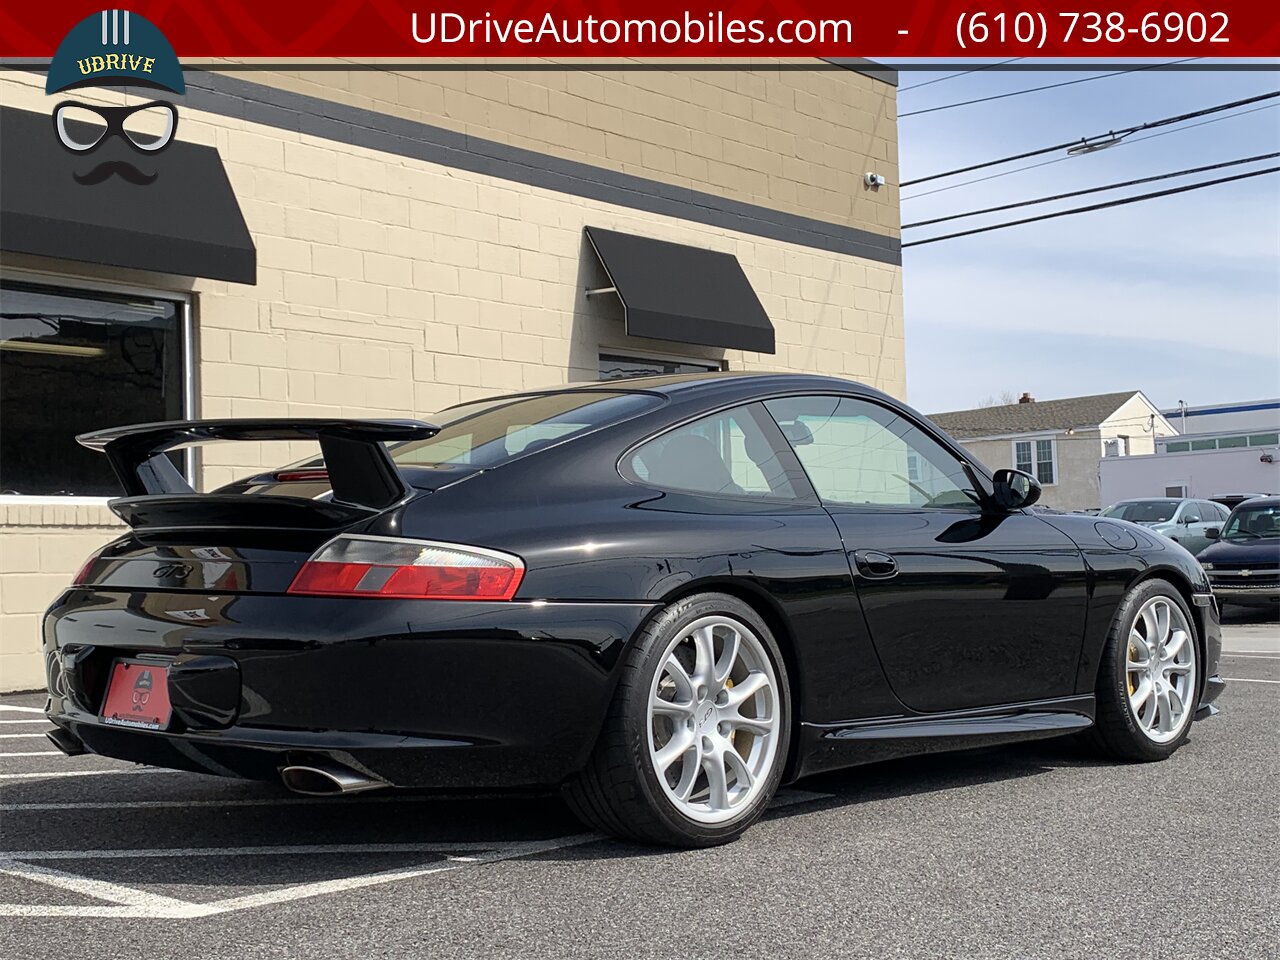 2004 Porsche 911 GT3 996 PCCB Sport Seats Red Stitching $118k MSRP   - Photo 6 - West Chester, PA 19382